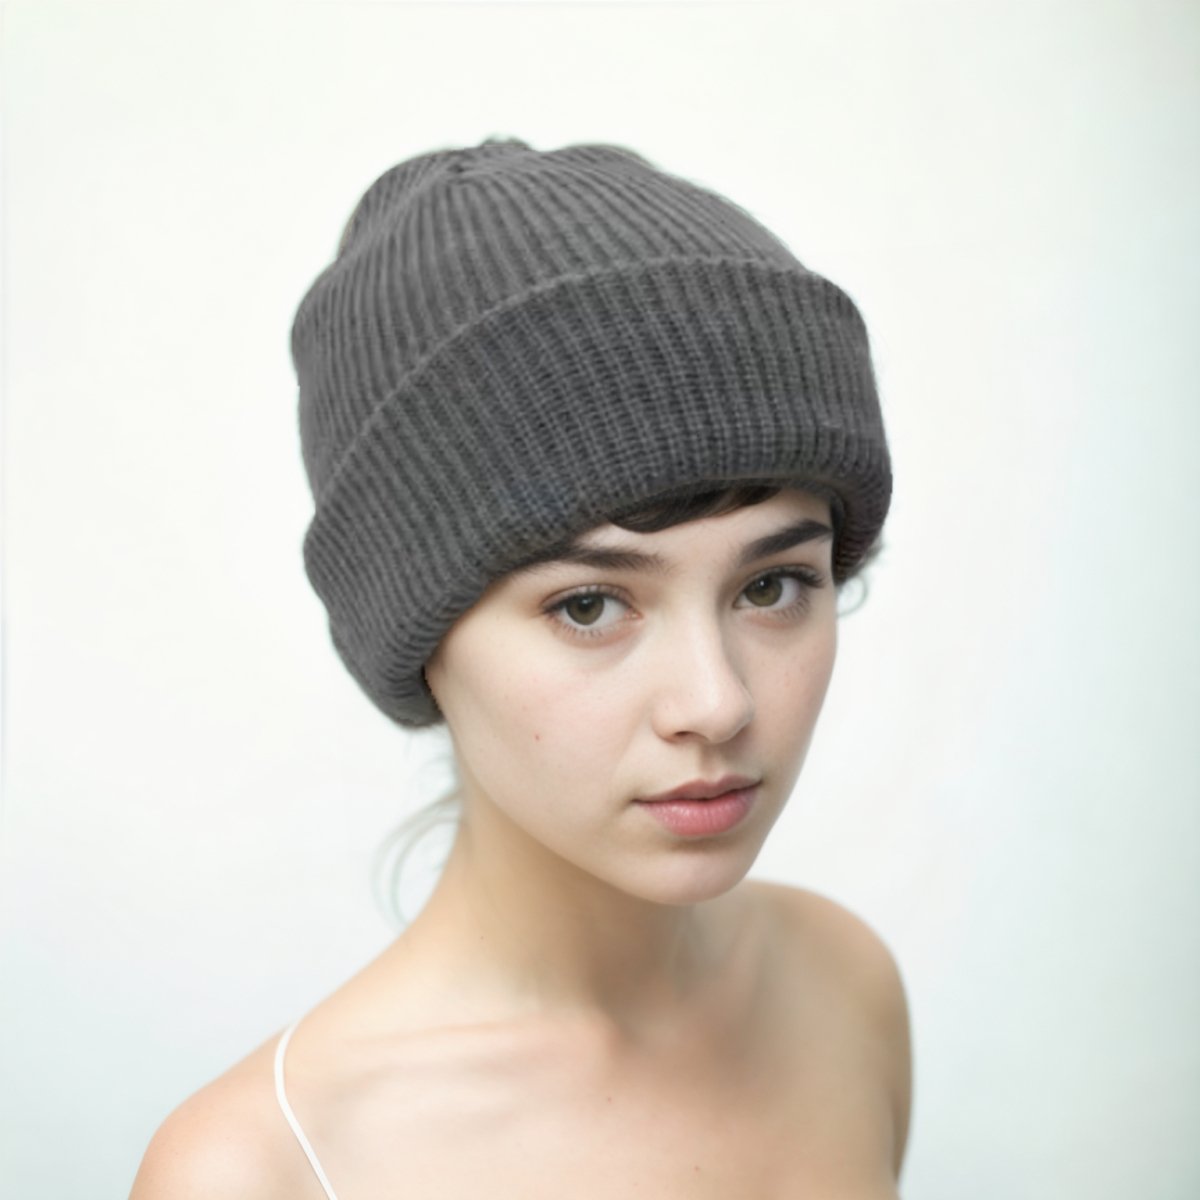 EMF Protecting Adults Beanie - High Shielding Efficiency - Grey - GroundedKiwi.nzhat hat5gbeanieblocking